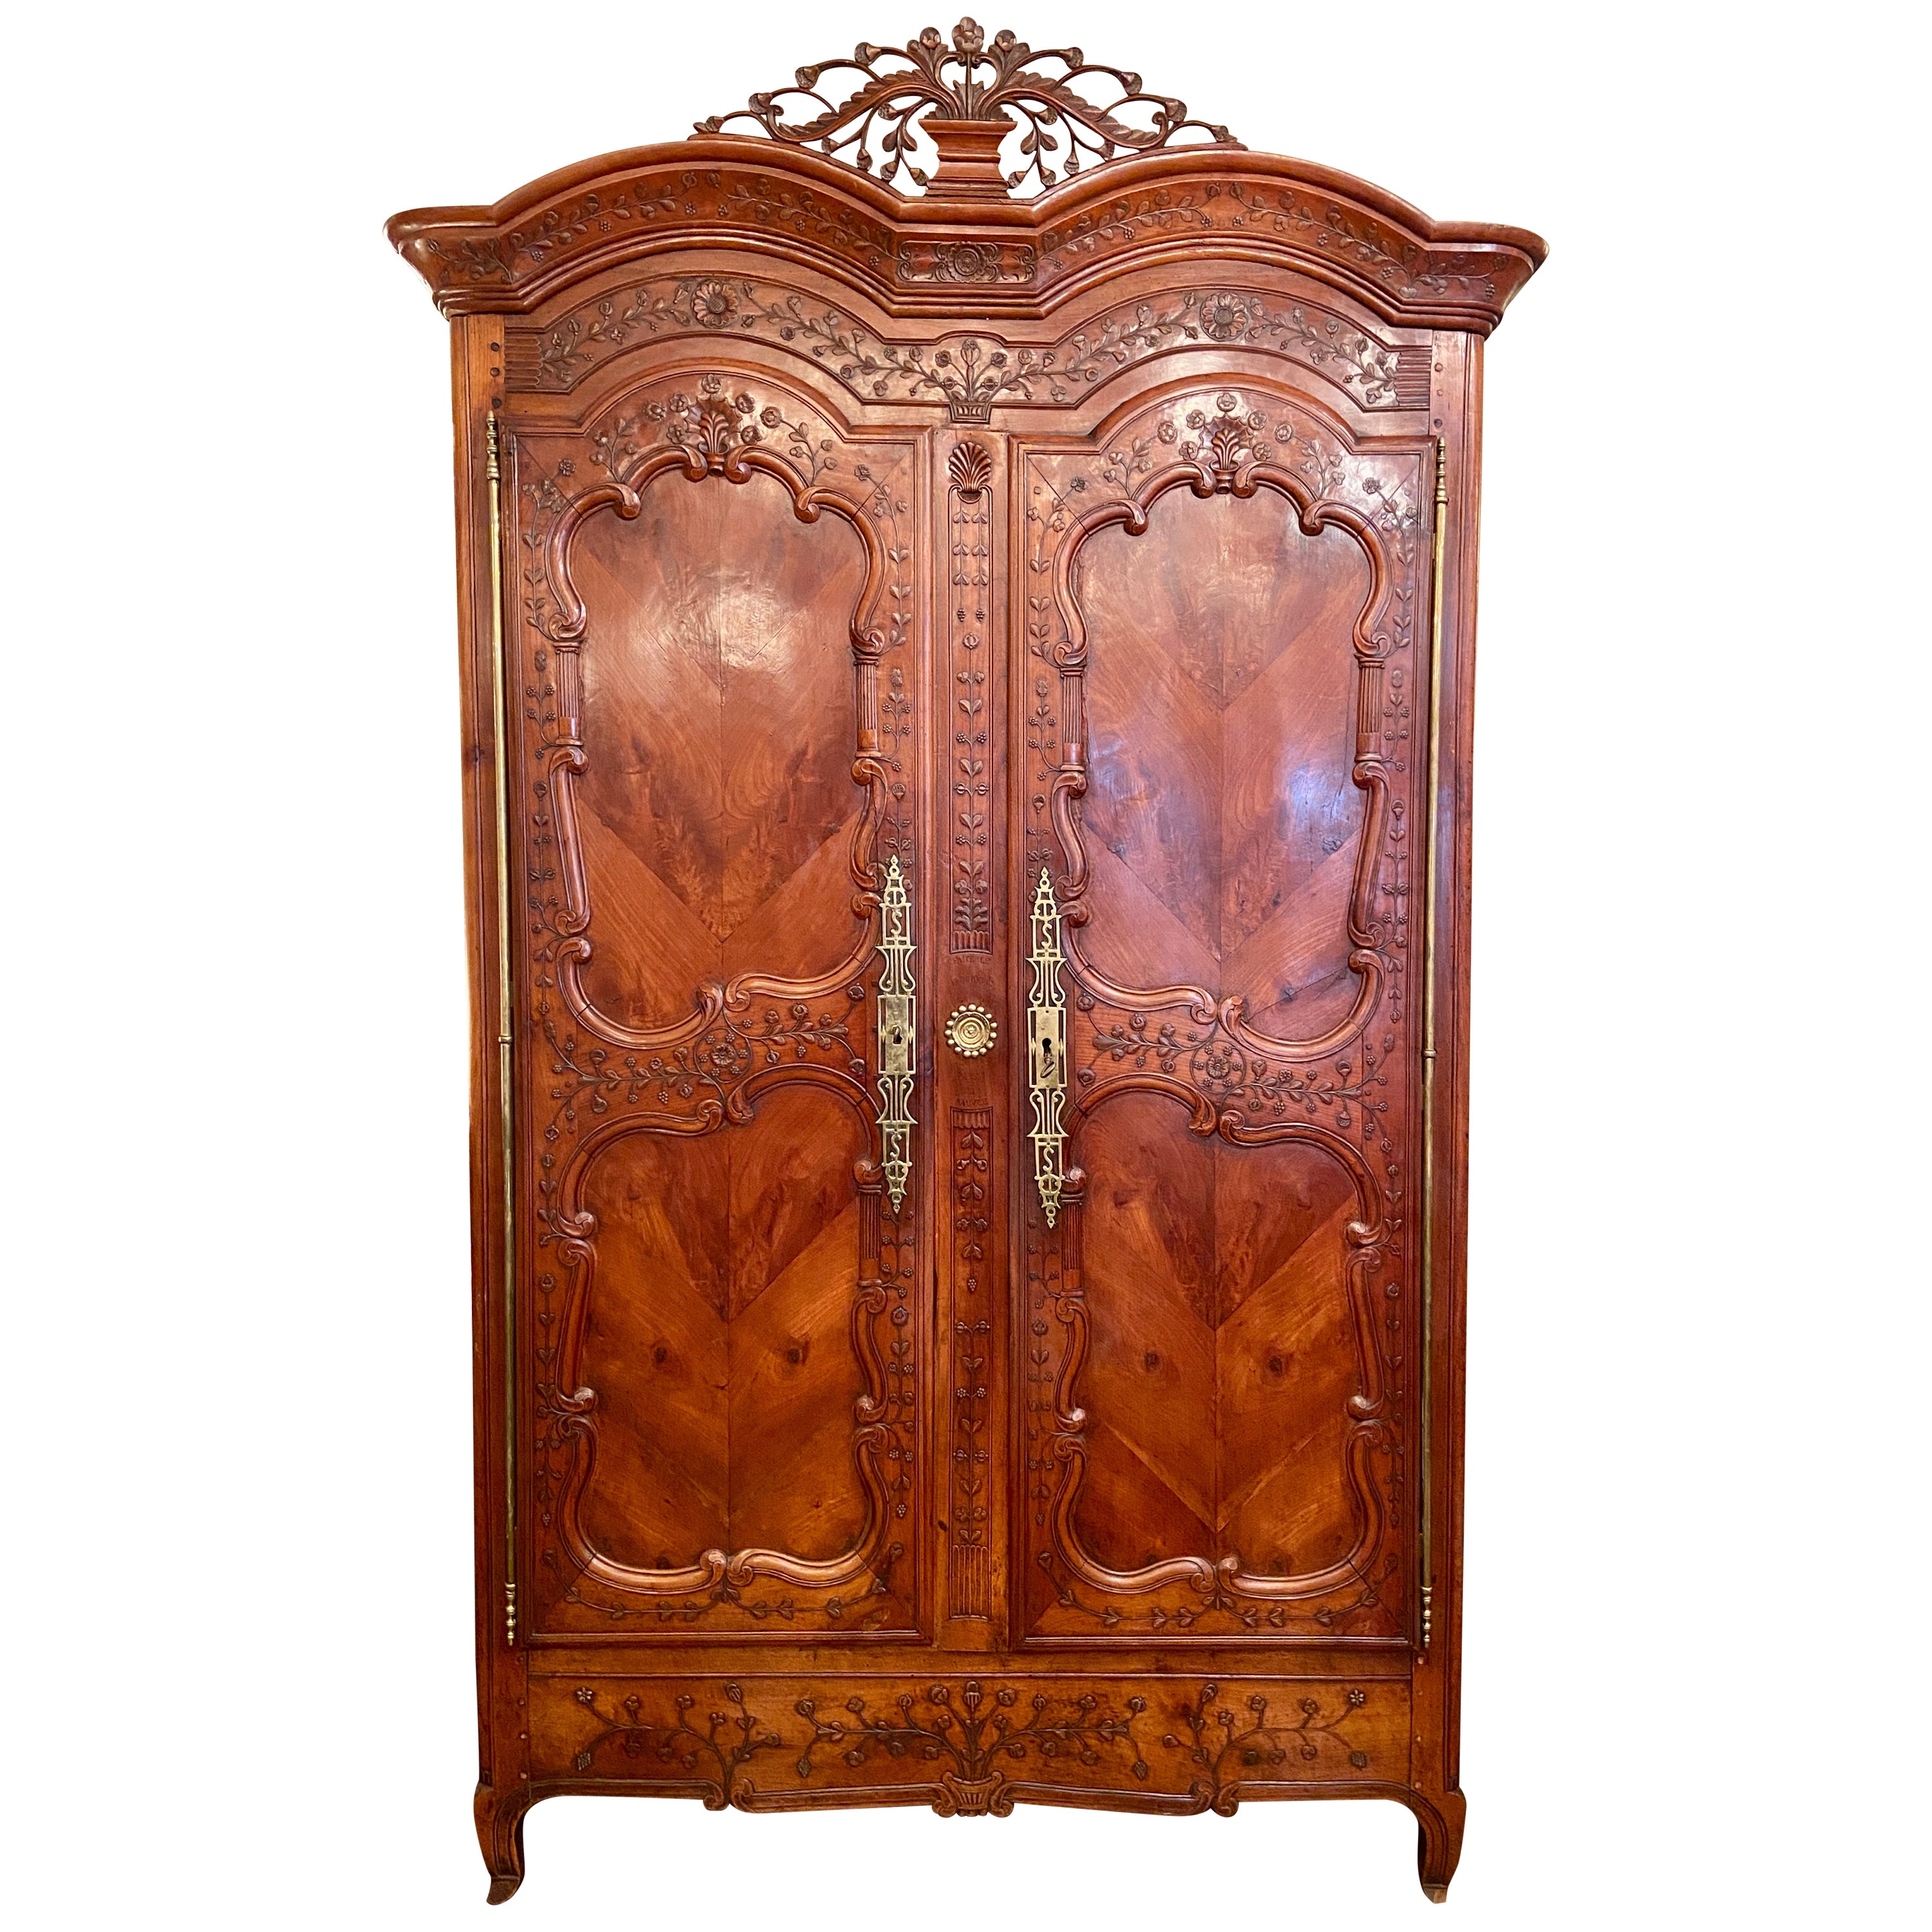 Antique French Carved Cherry Wood Armoire De Breton Dated October 13th, 1846